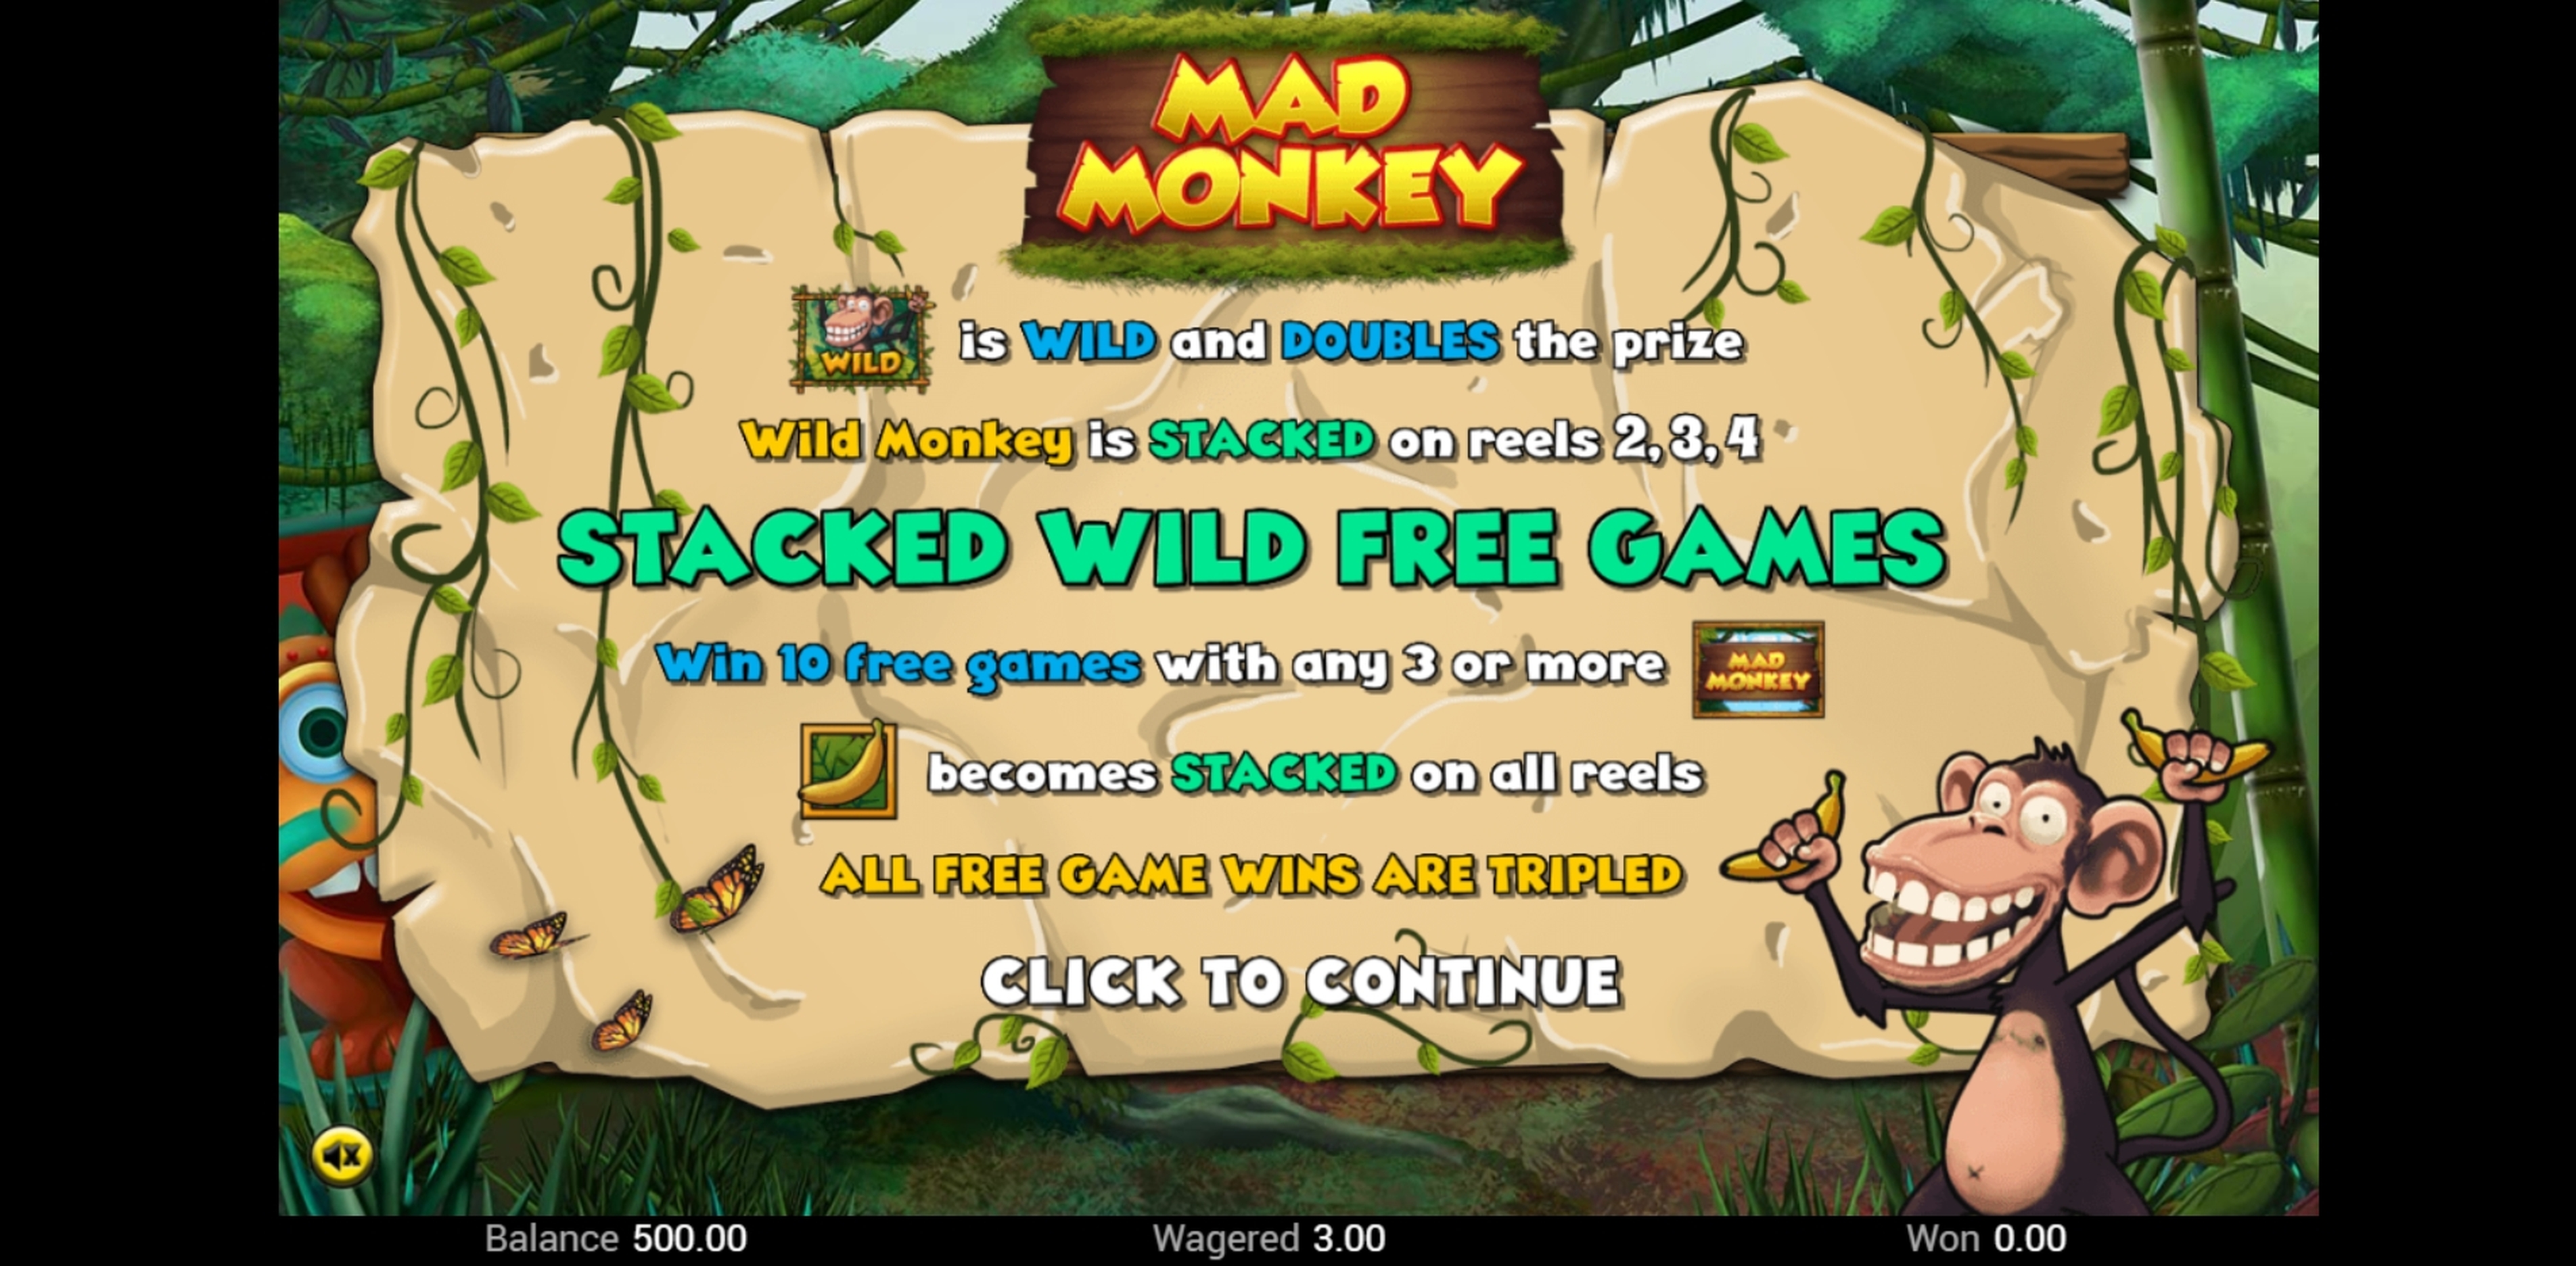 Play Mad Monkey Free Casino Slot Game by Top Trend Gaming